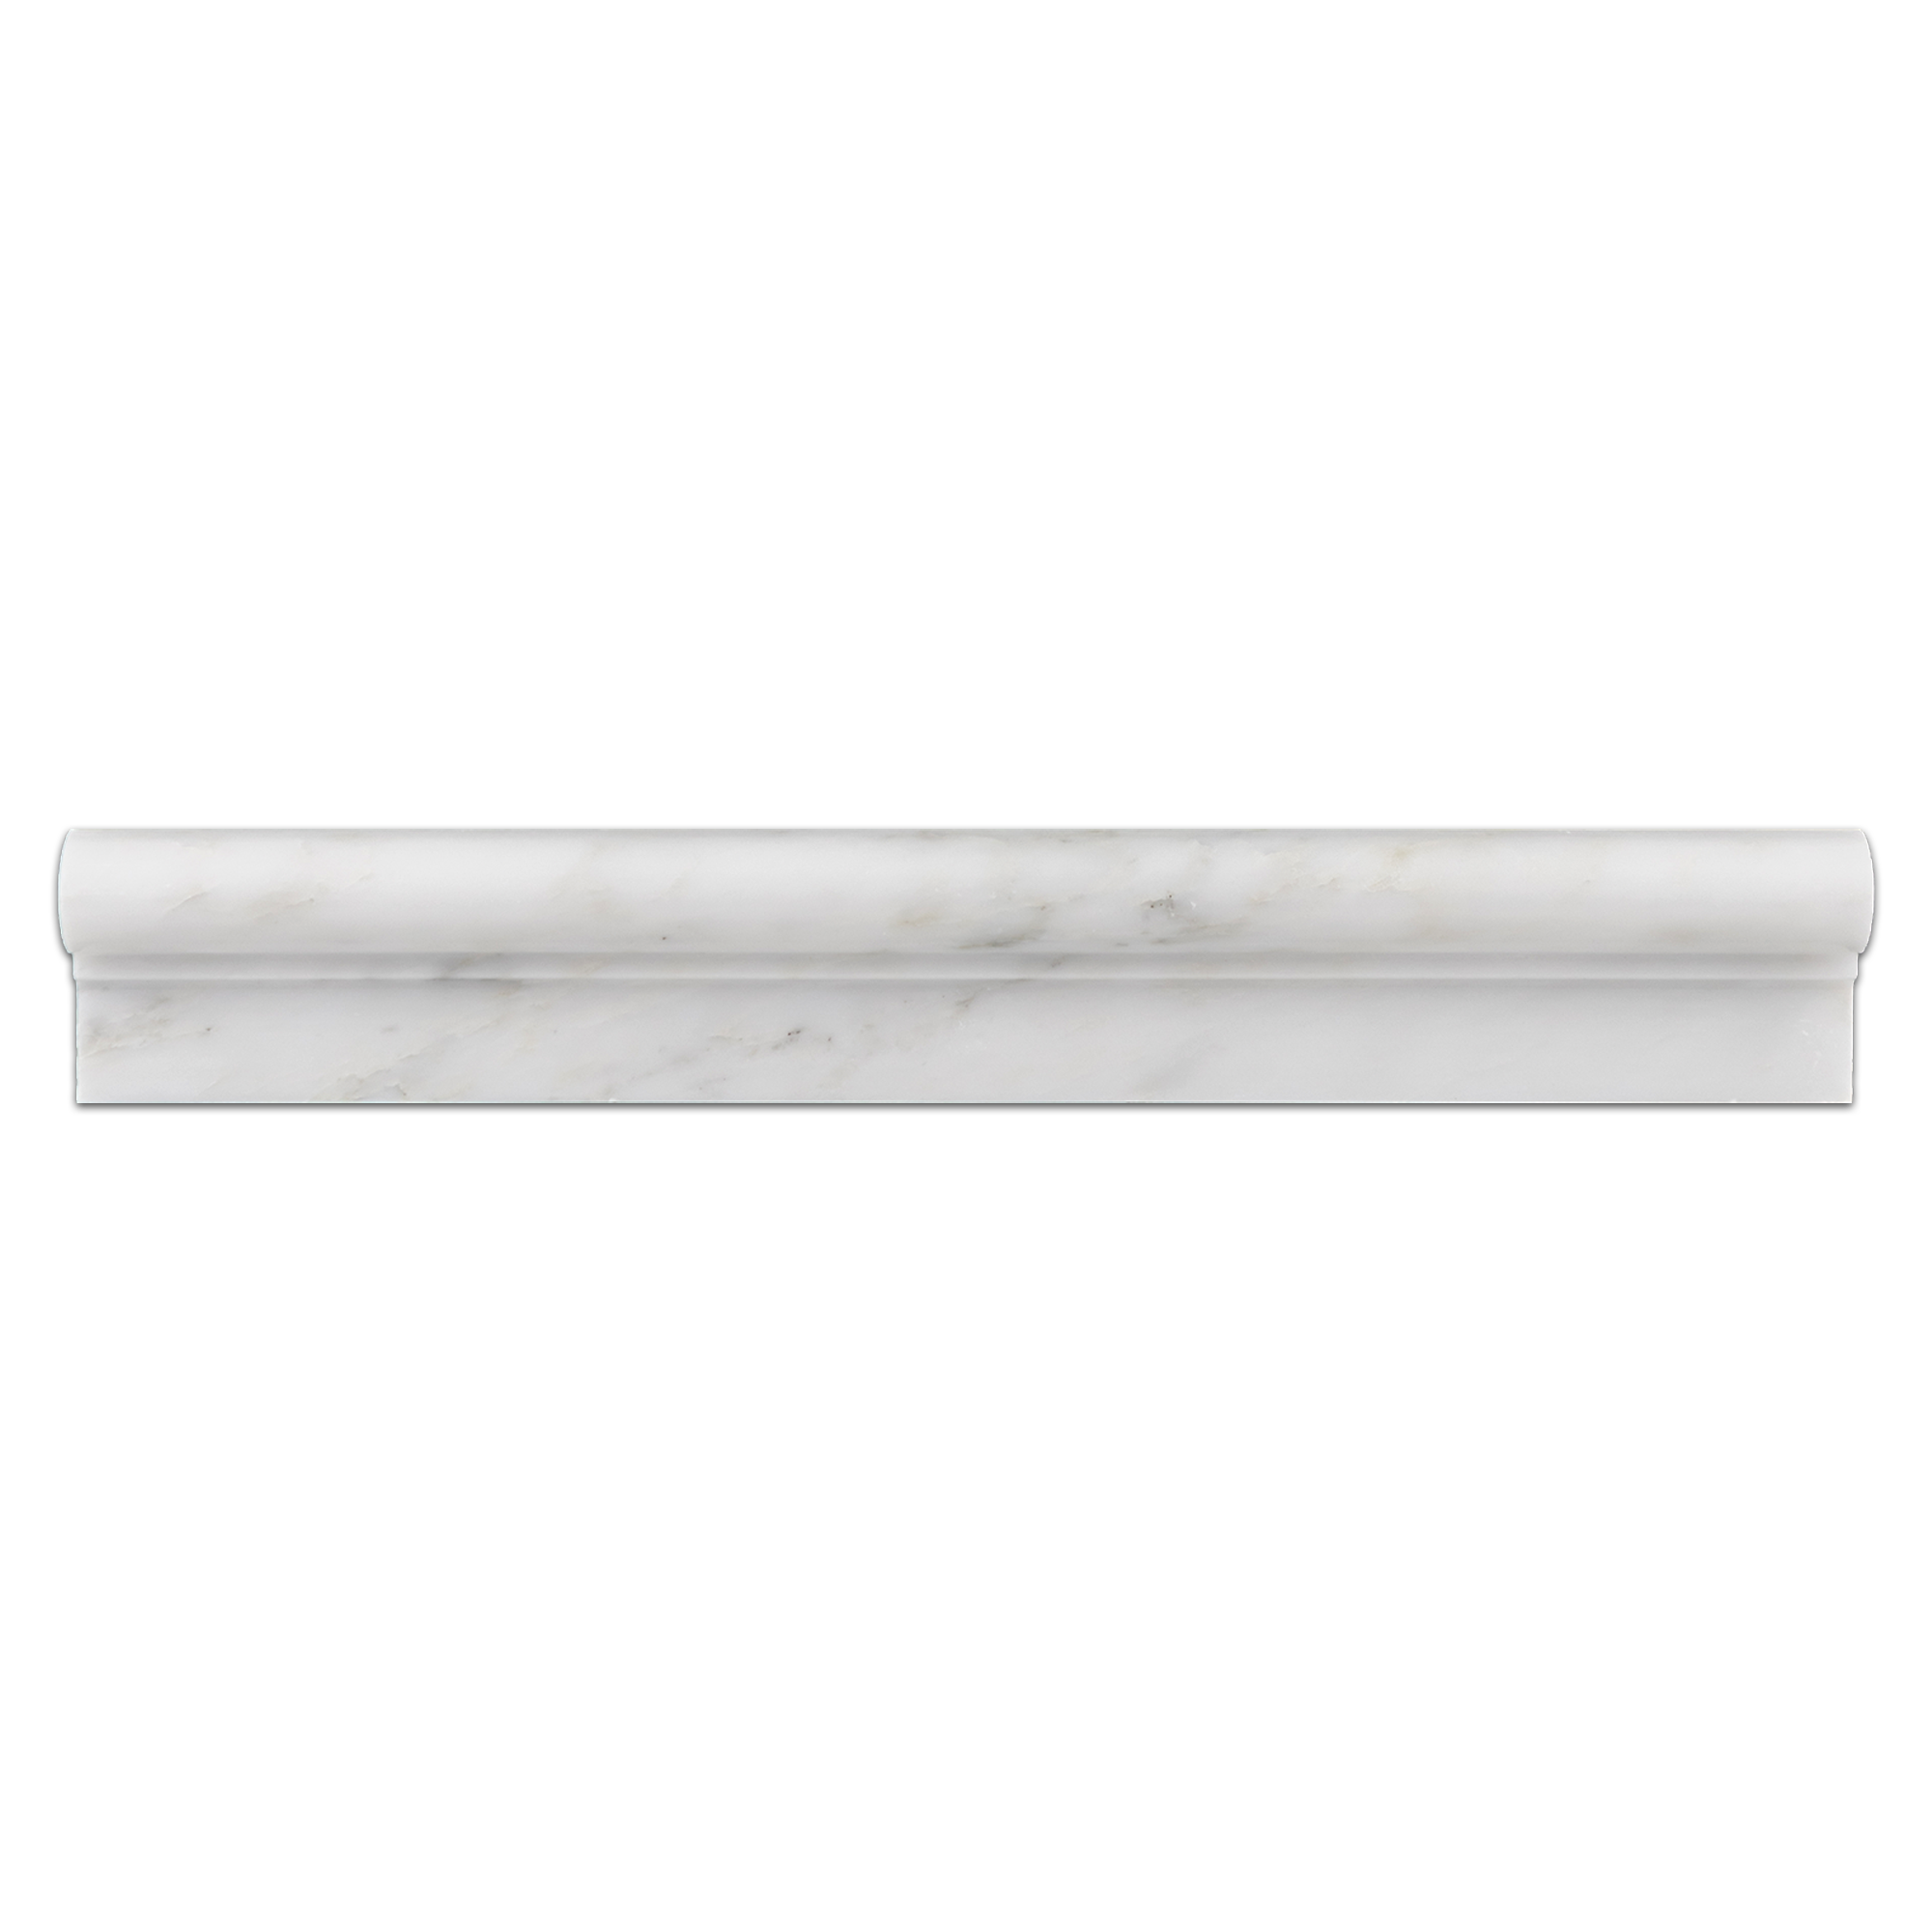 Elon Pearl White Marble Ogee 2x12 Honed Tile - Surface Group International Product